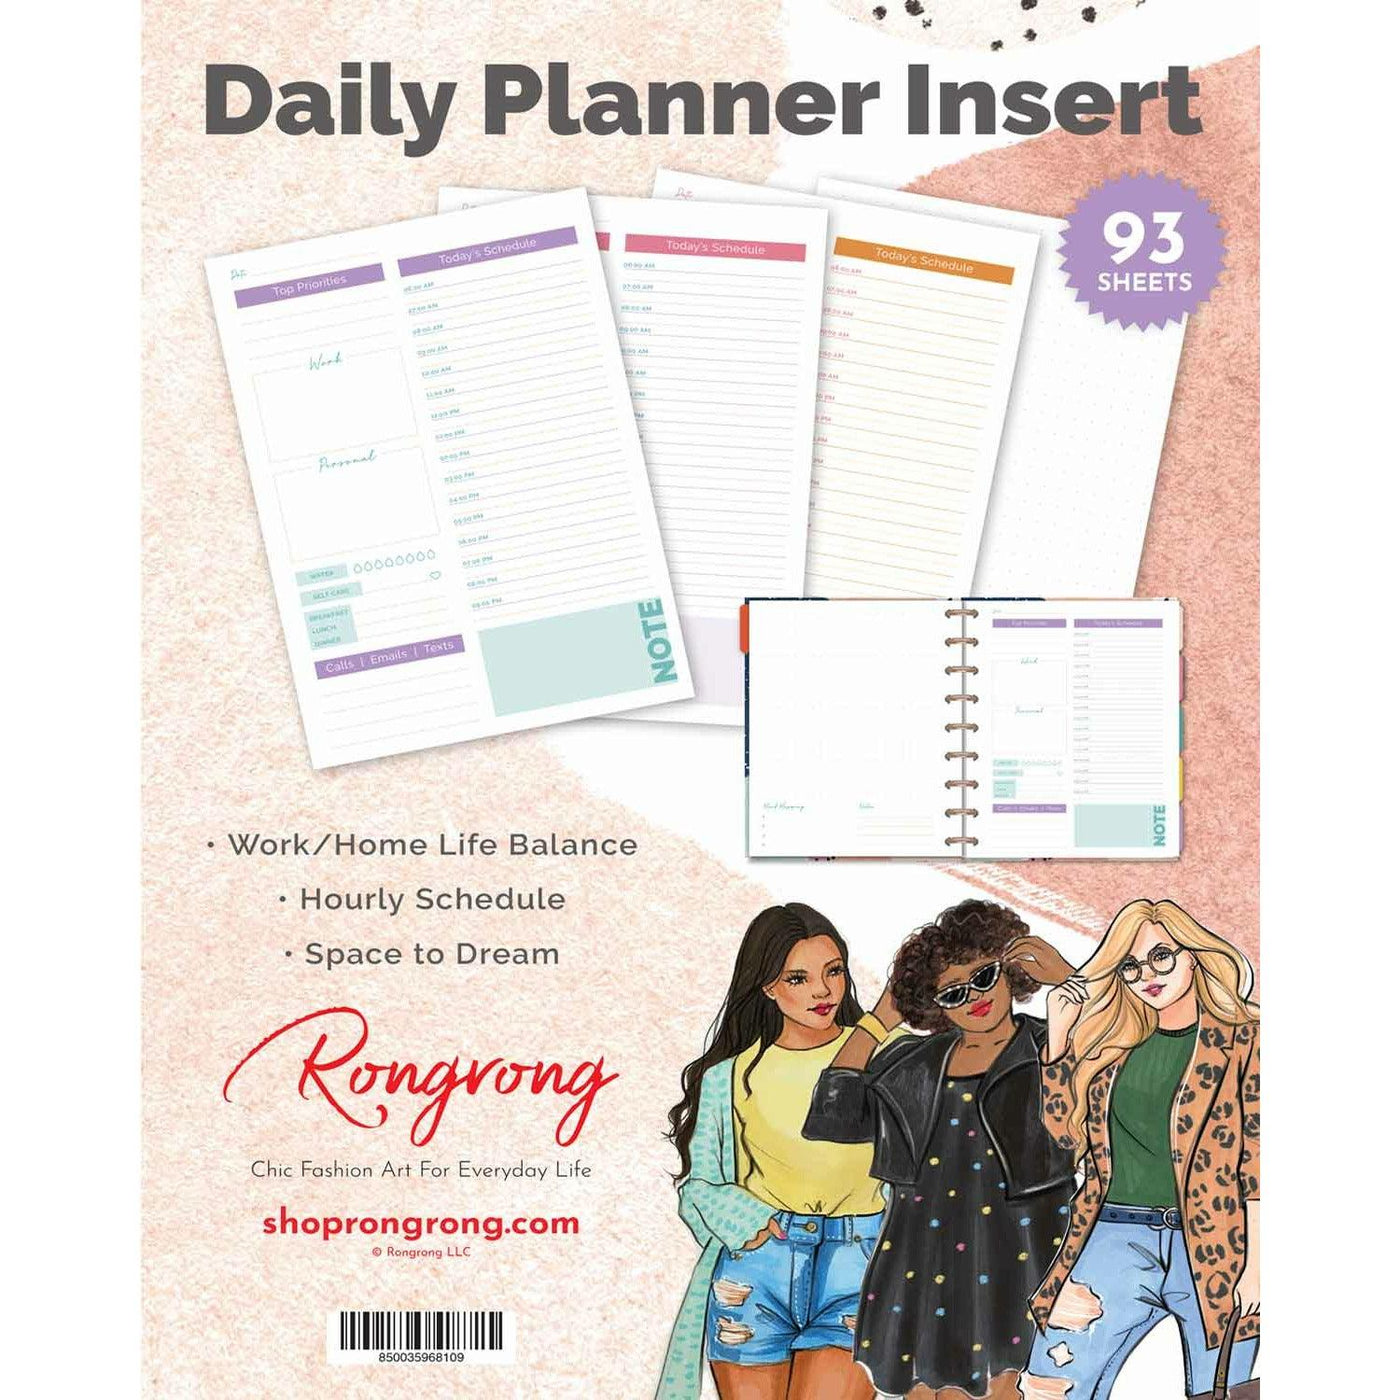 DAILY PLANNER INSERT - CLASSIC SIZE - QUARTERLY SUPPLY by Rongrong DeVoe- Back Cover